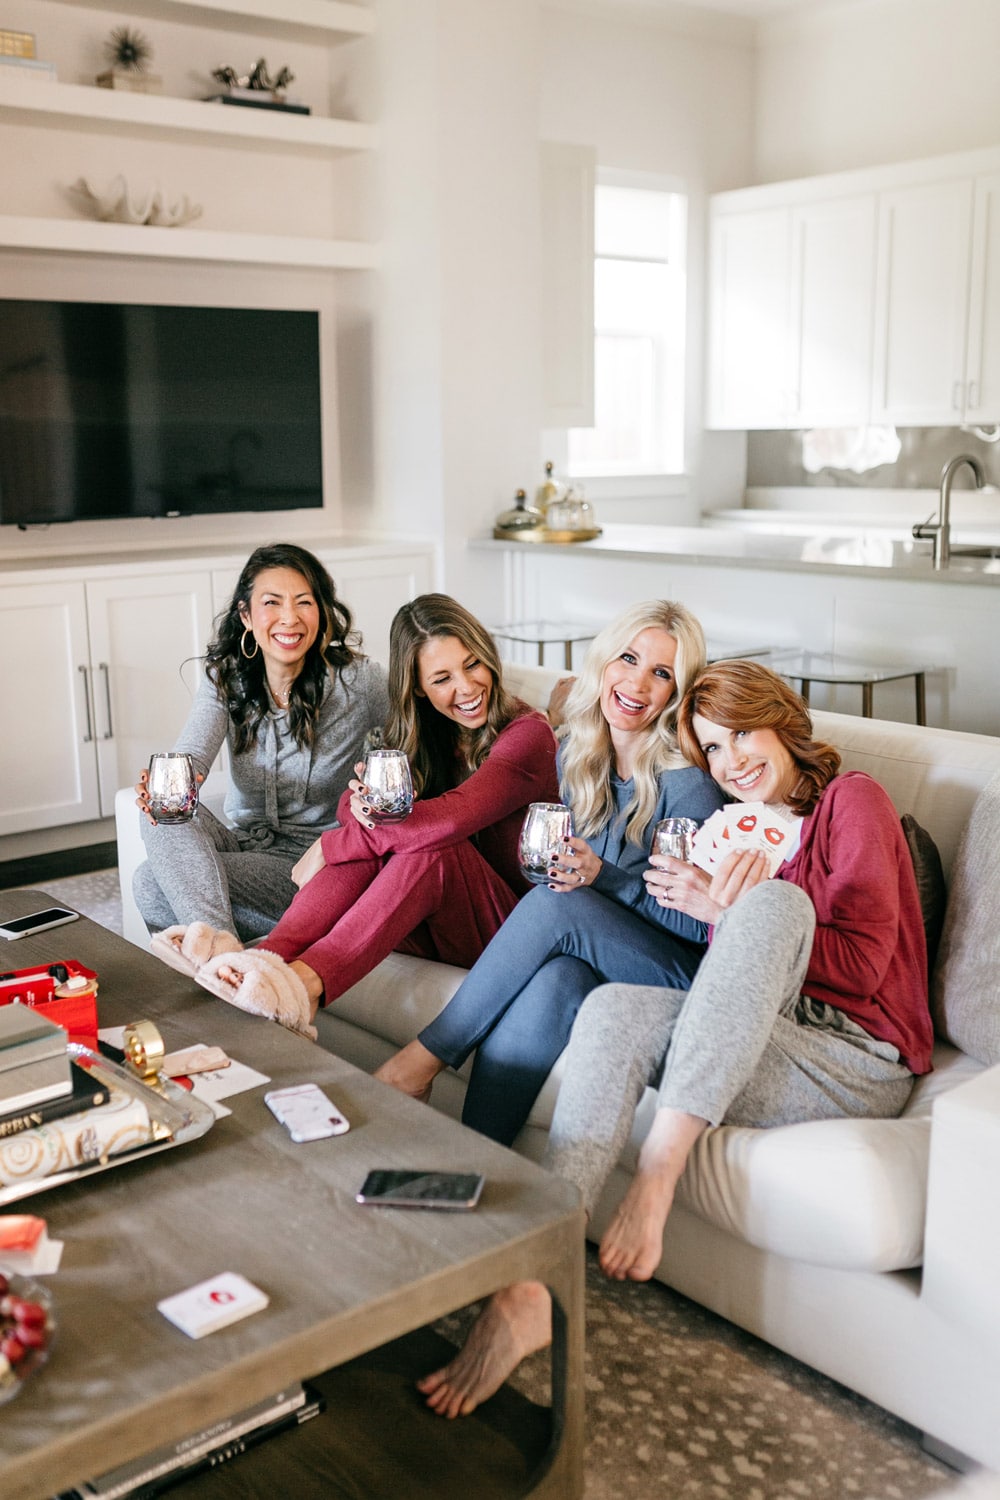 chic at every age girls night in chic loungewear